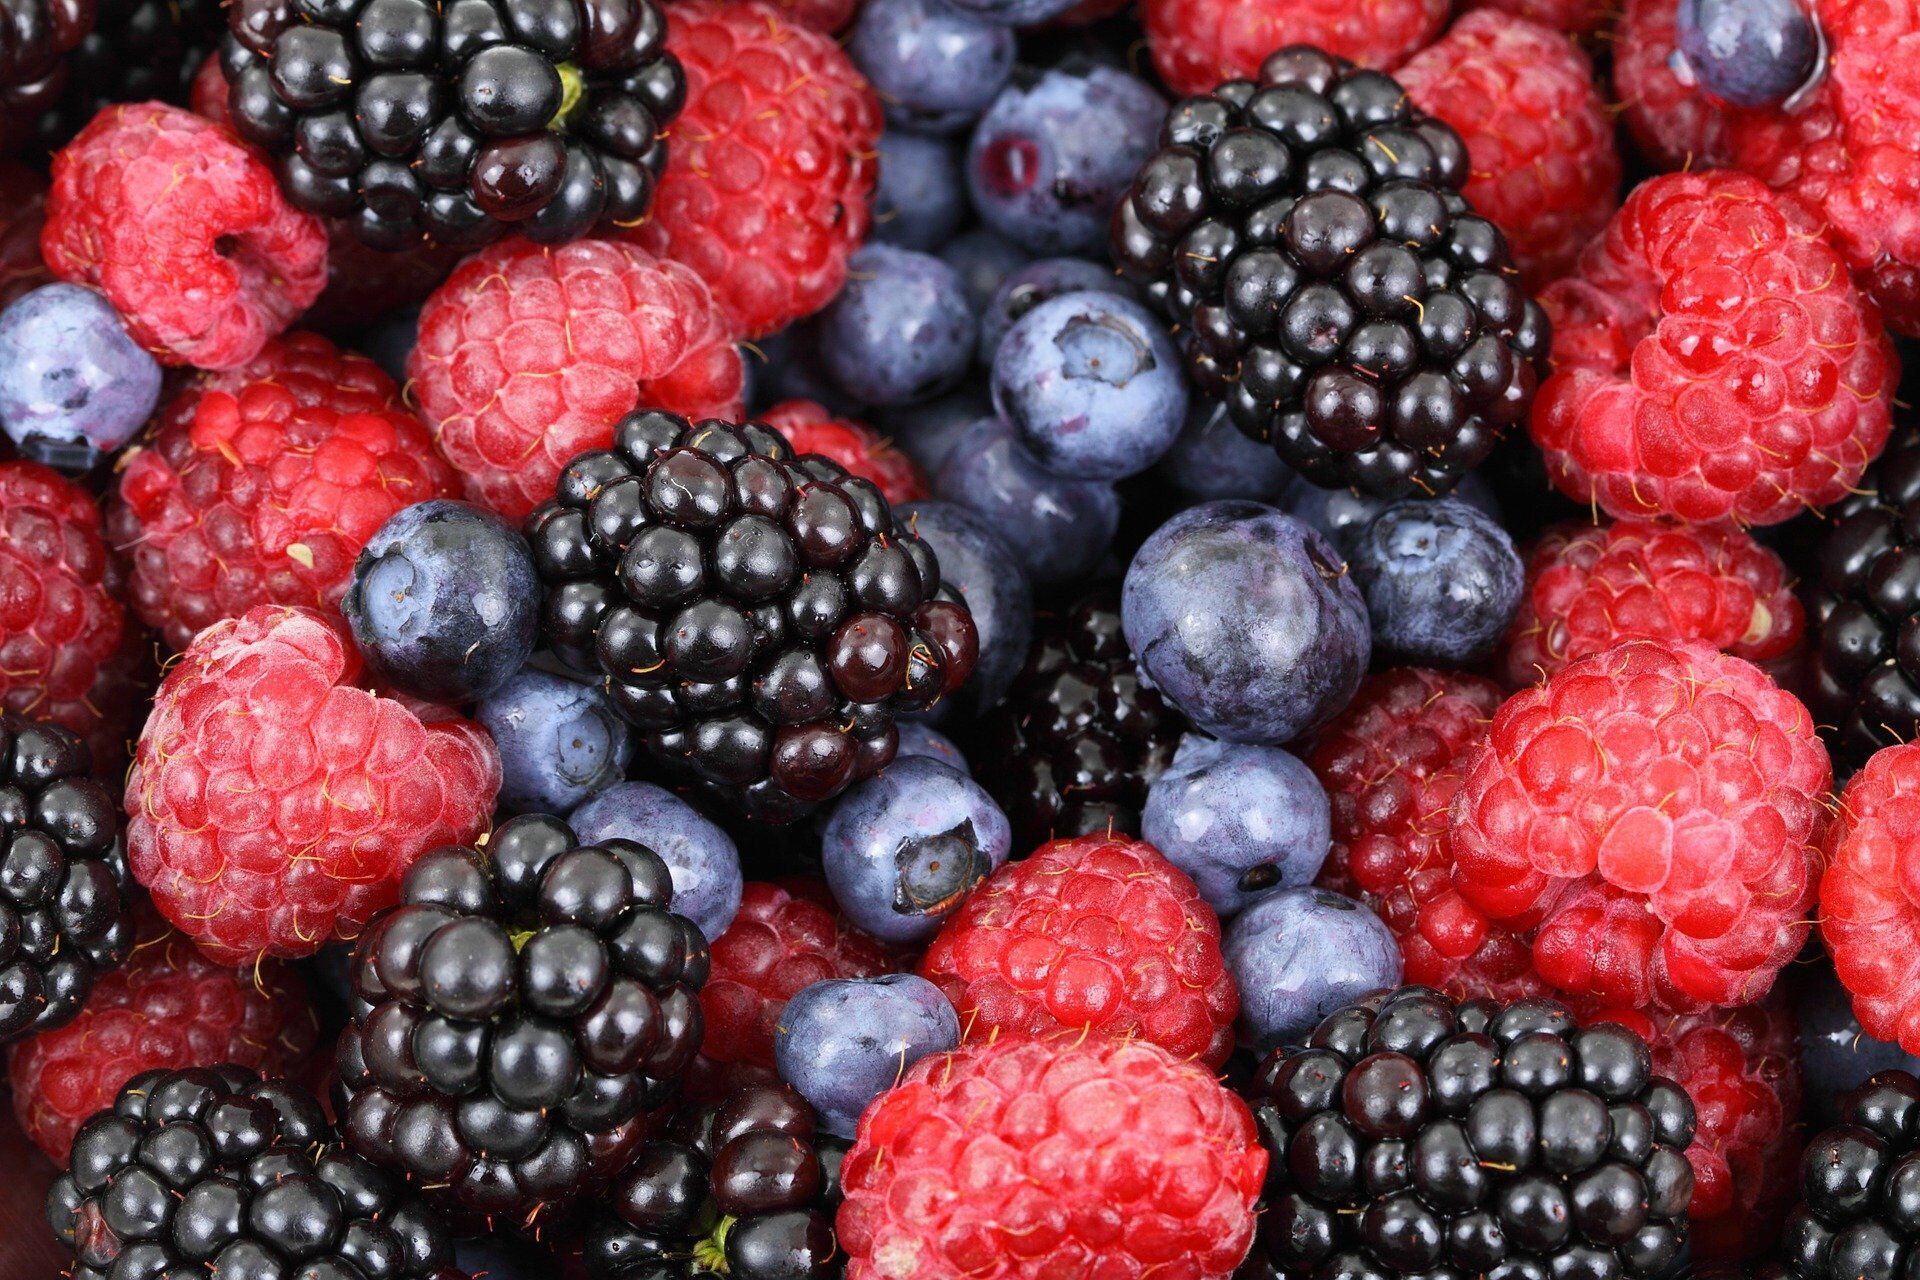 Berries for freeze-drying